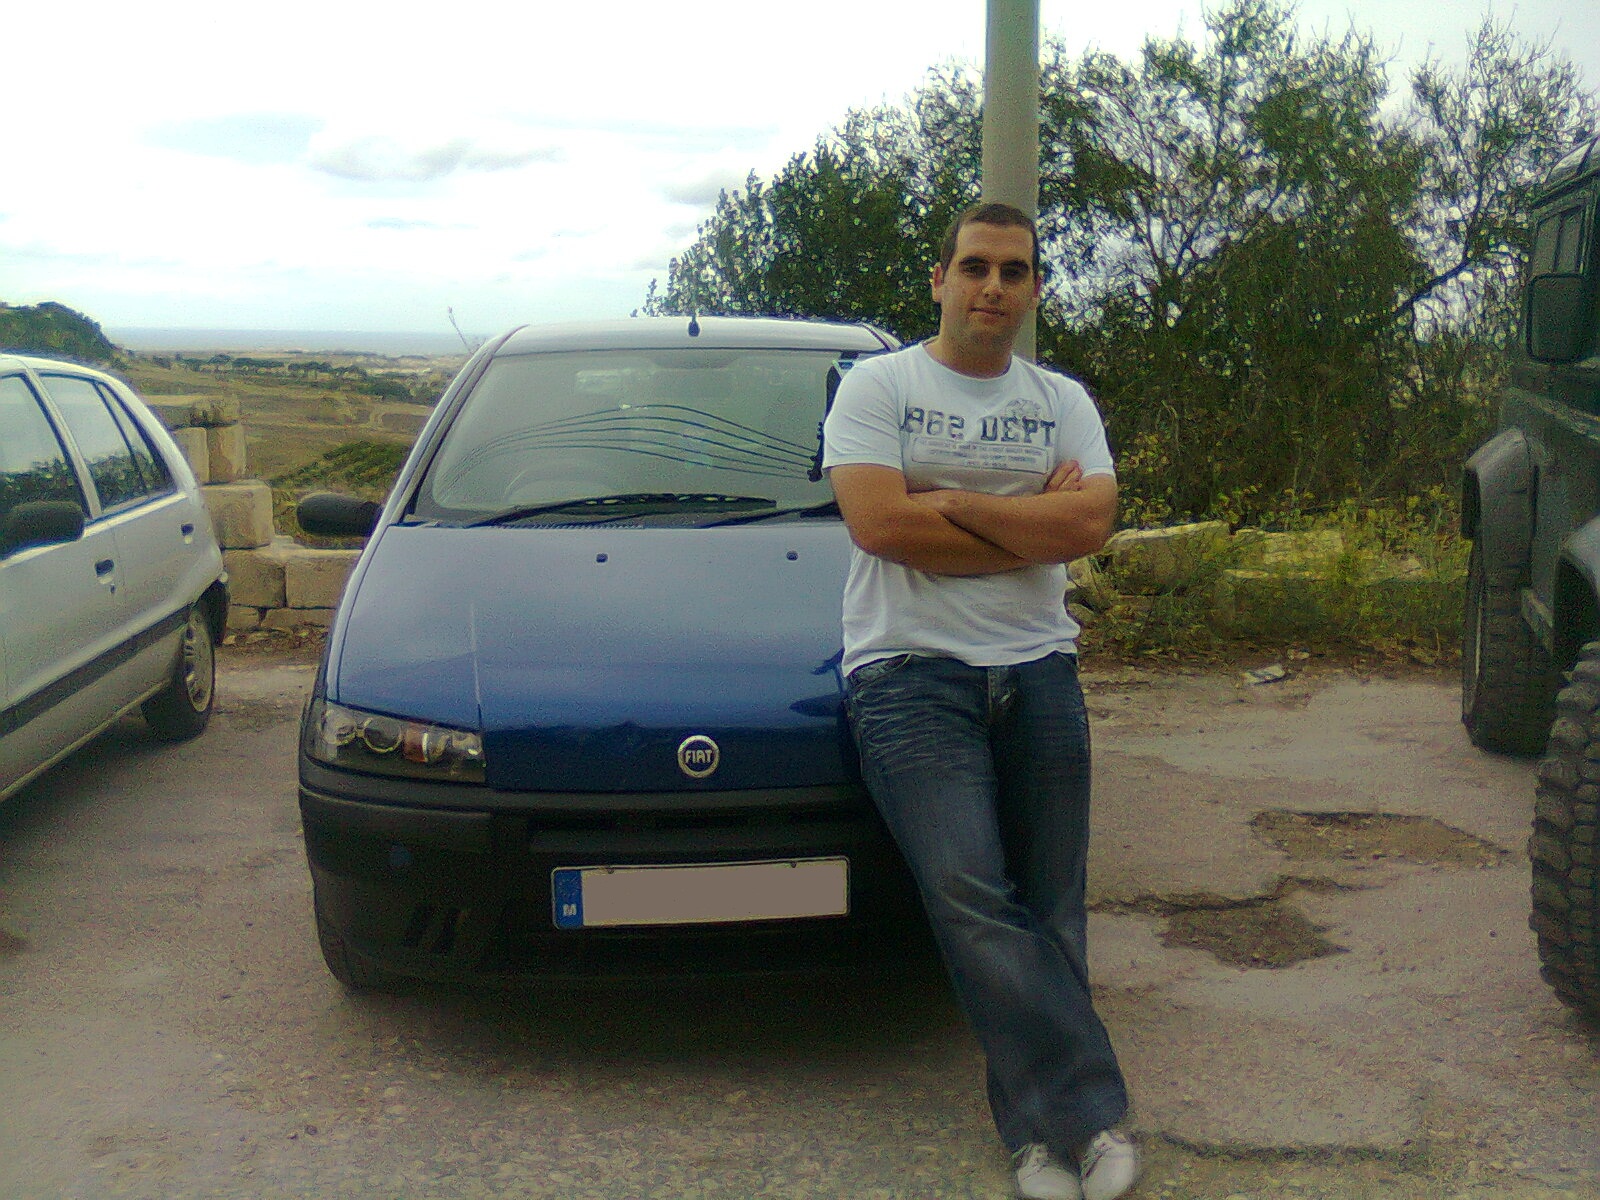 Me with my car